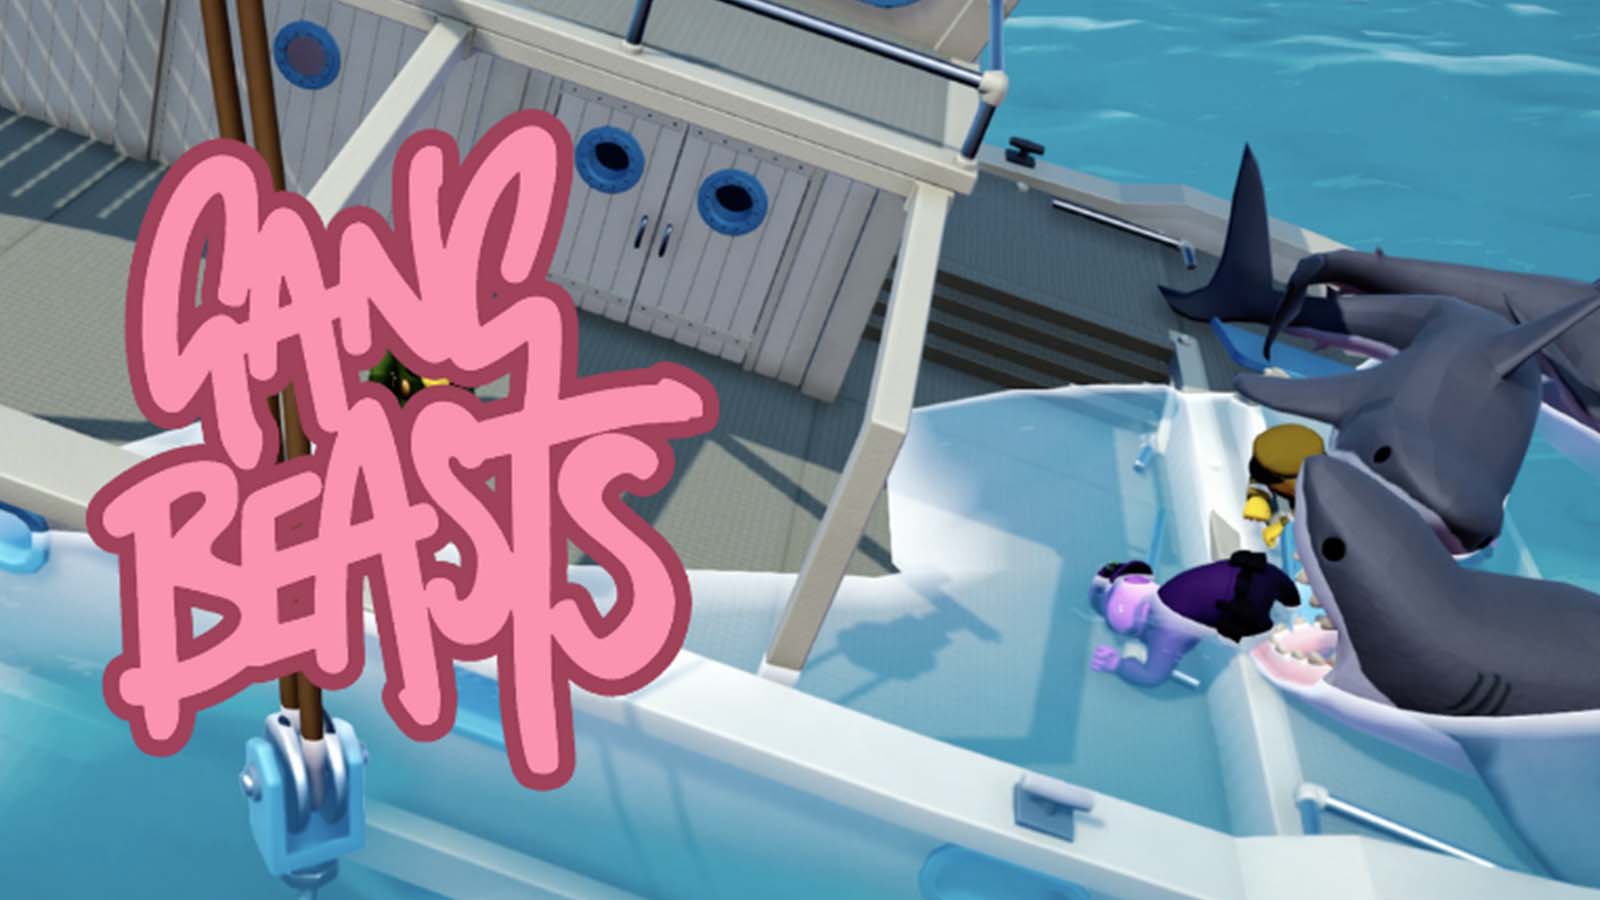 gang beasts controls for controller